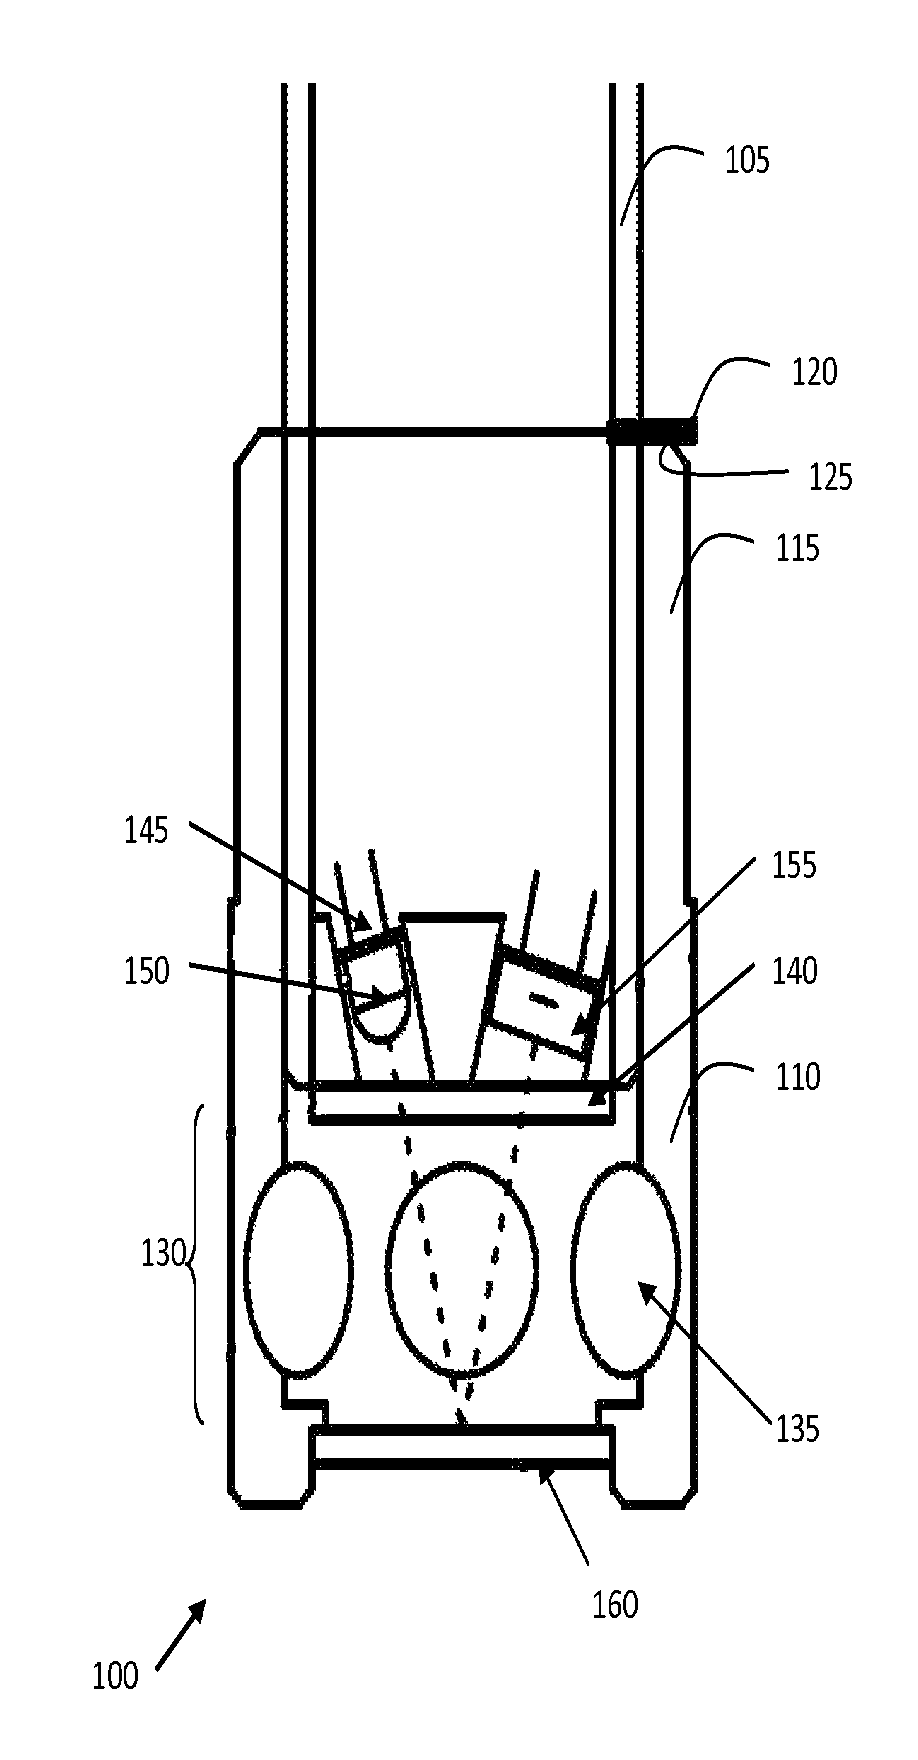 Absorption probe for measuring dissolved organic carbon in an aqueous sample